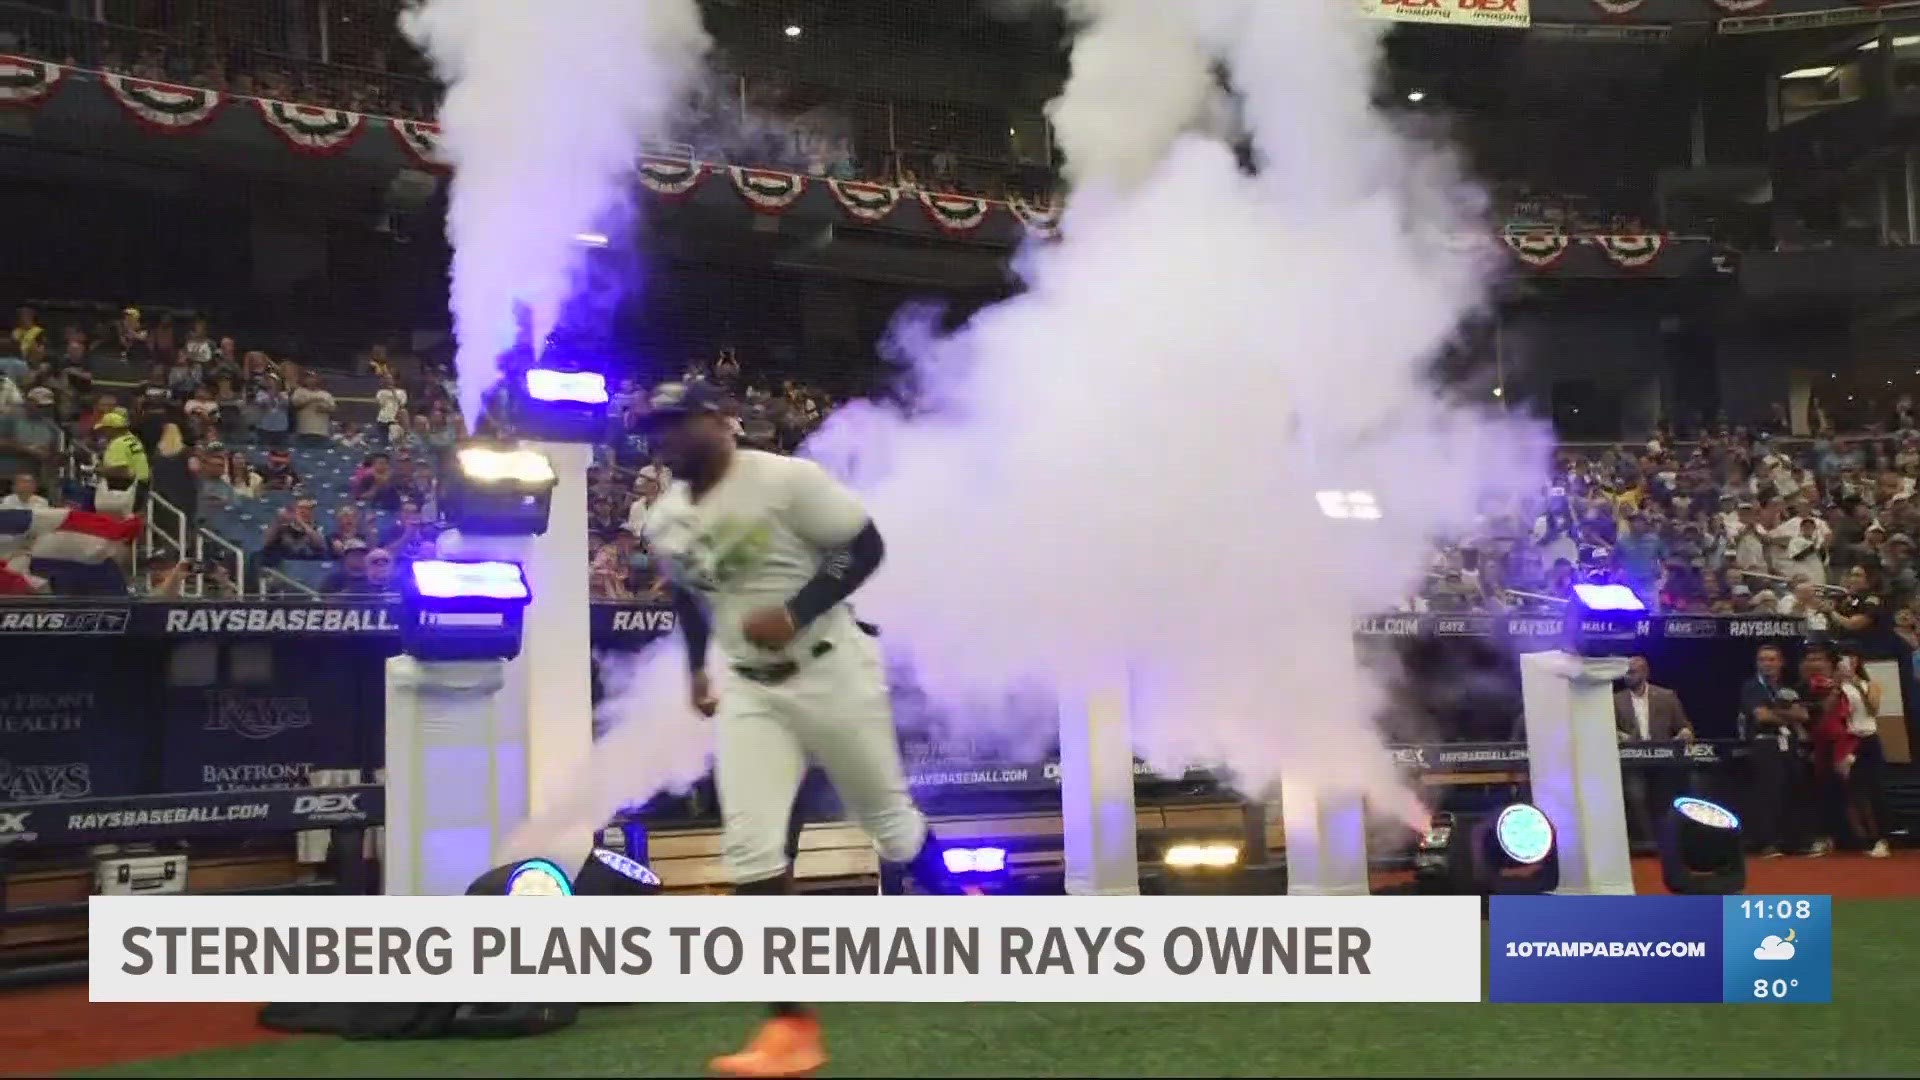 A report from The Athletic says there are groups interested in purchasing the Tampa Bay Rays.